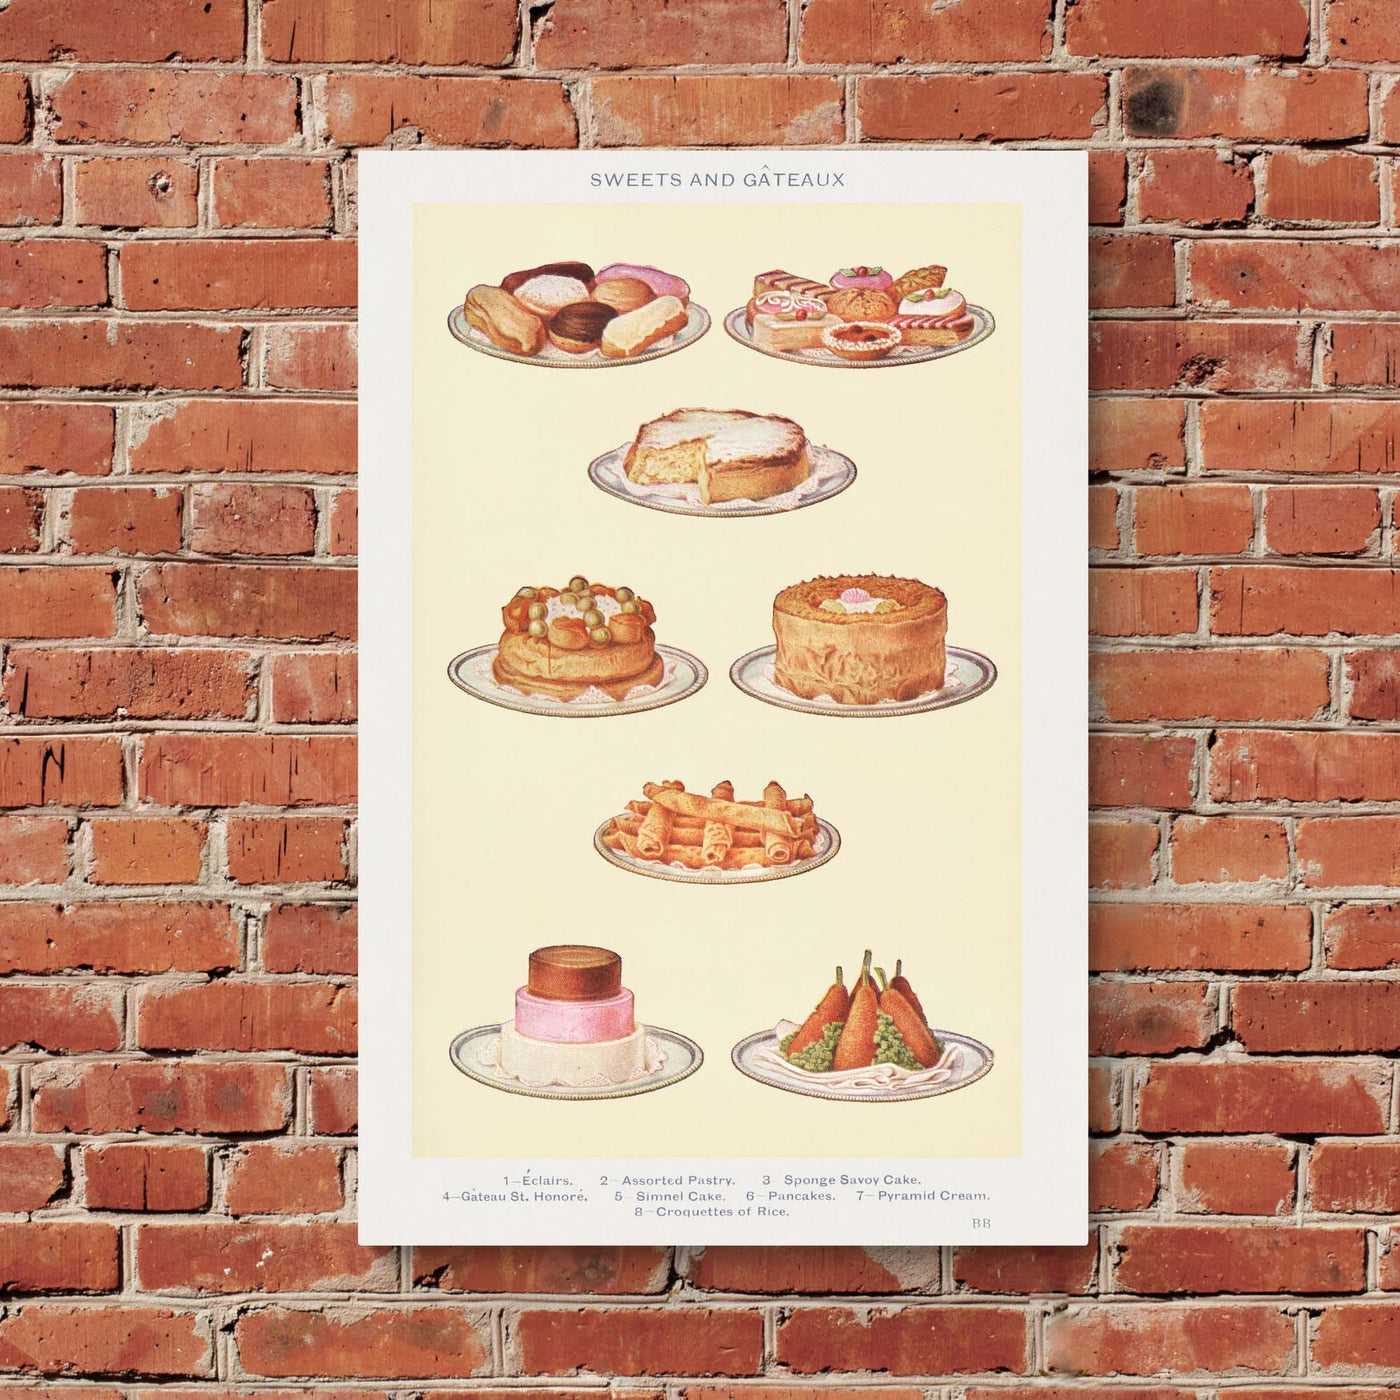 "Mrs Beeton's Sweets and Gateaux" on Framed Prints, Canvas, Aluminium, Acrylic or Print-only